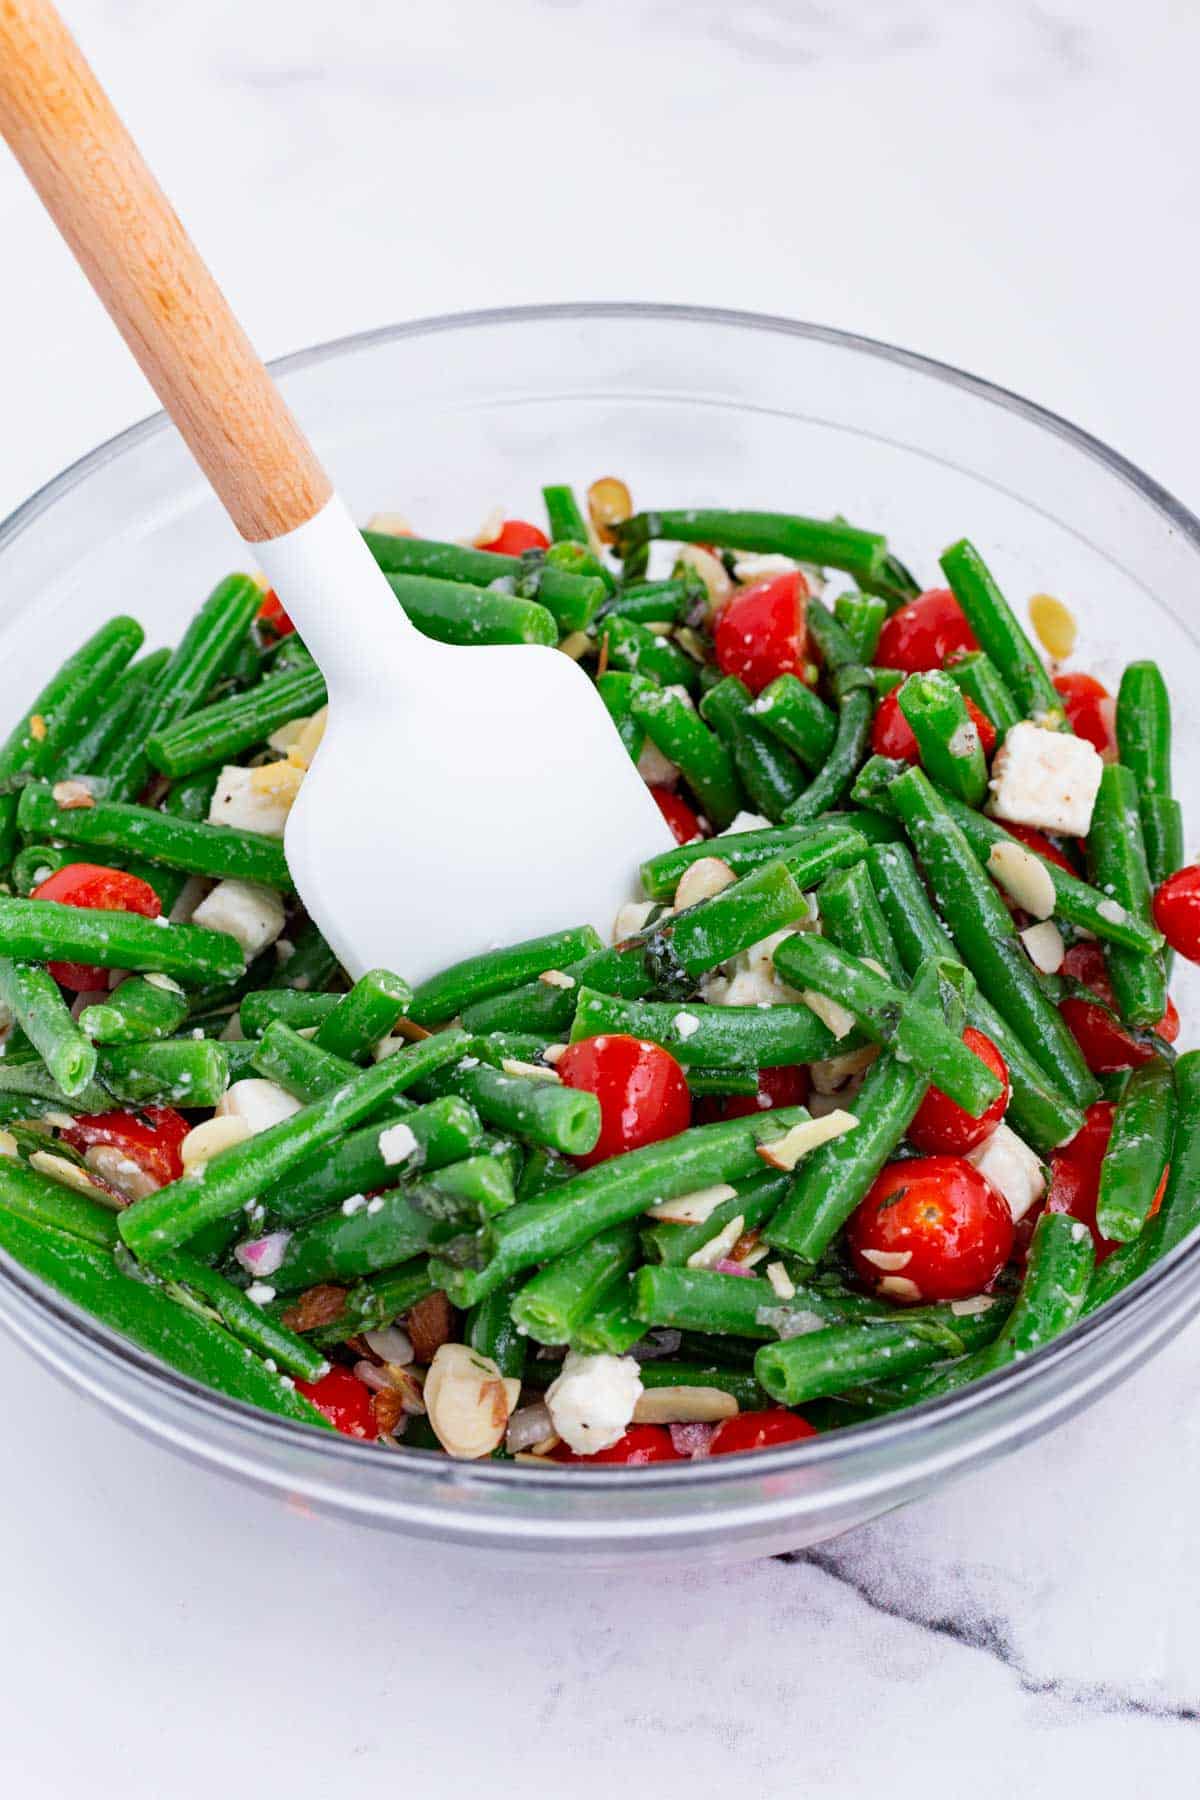 Green bean salad is a healthy and tasty recipe for the summer months.